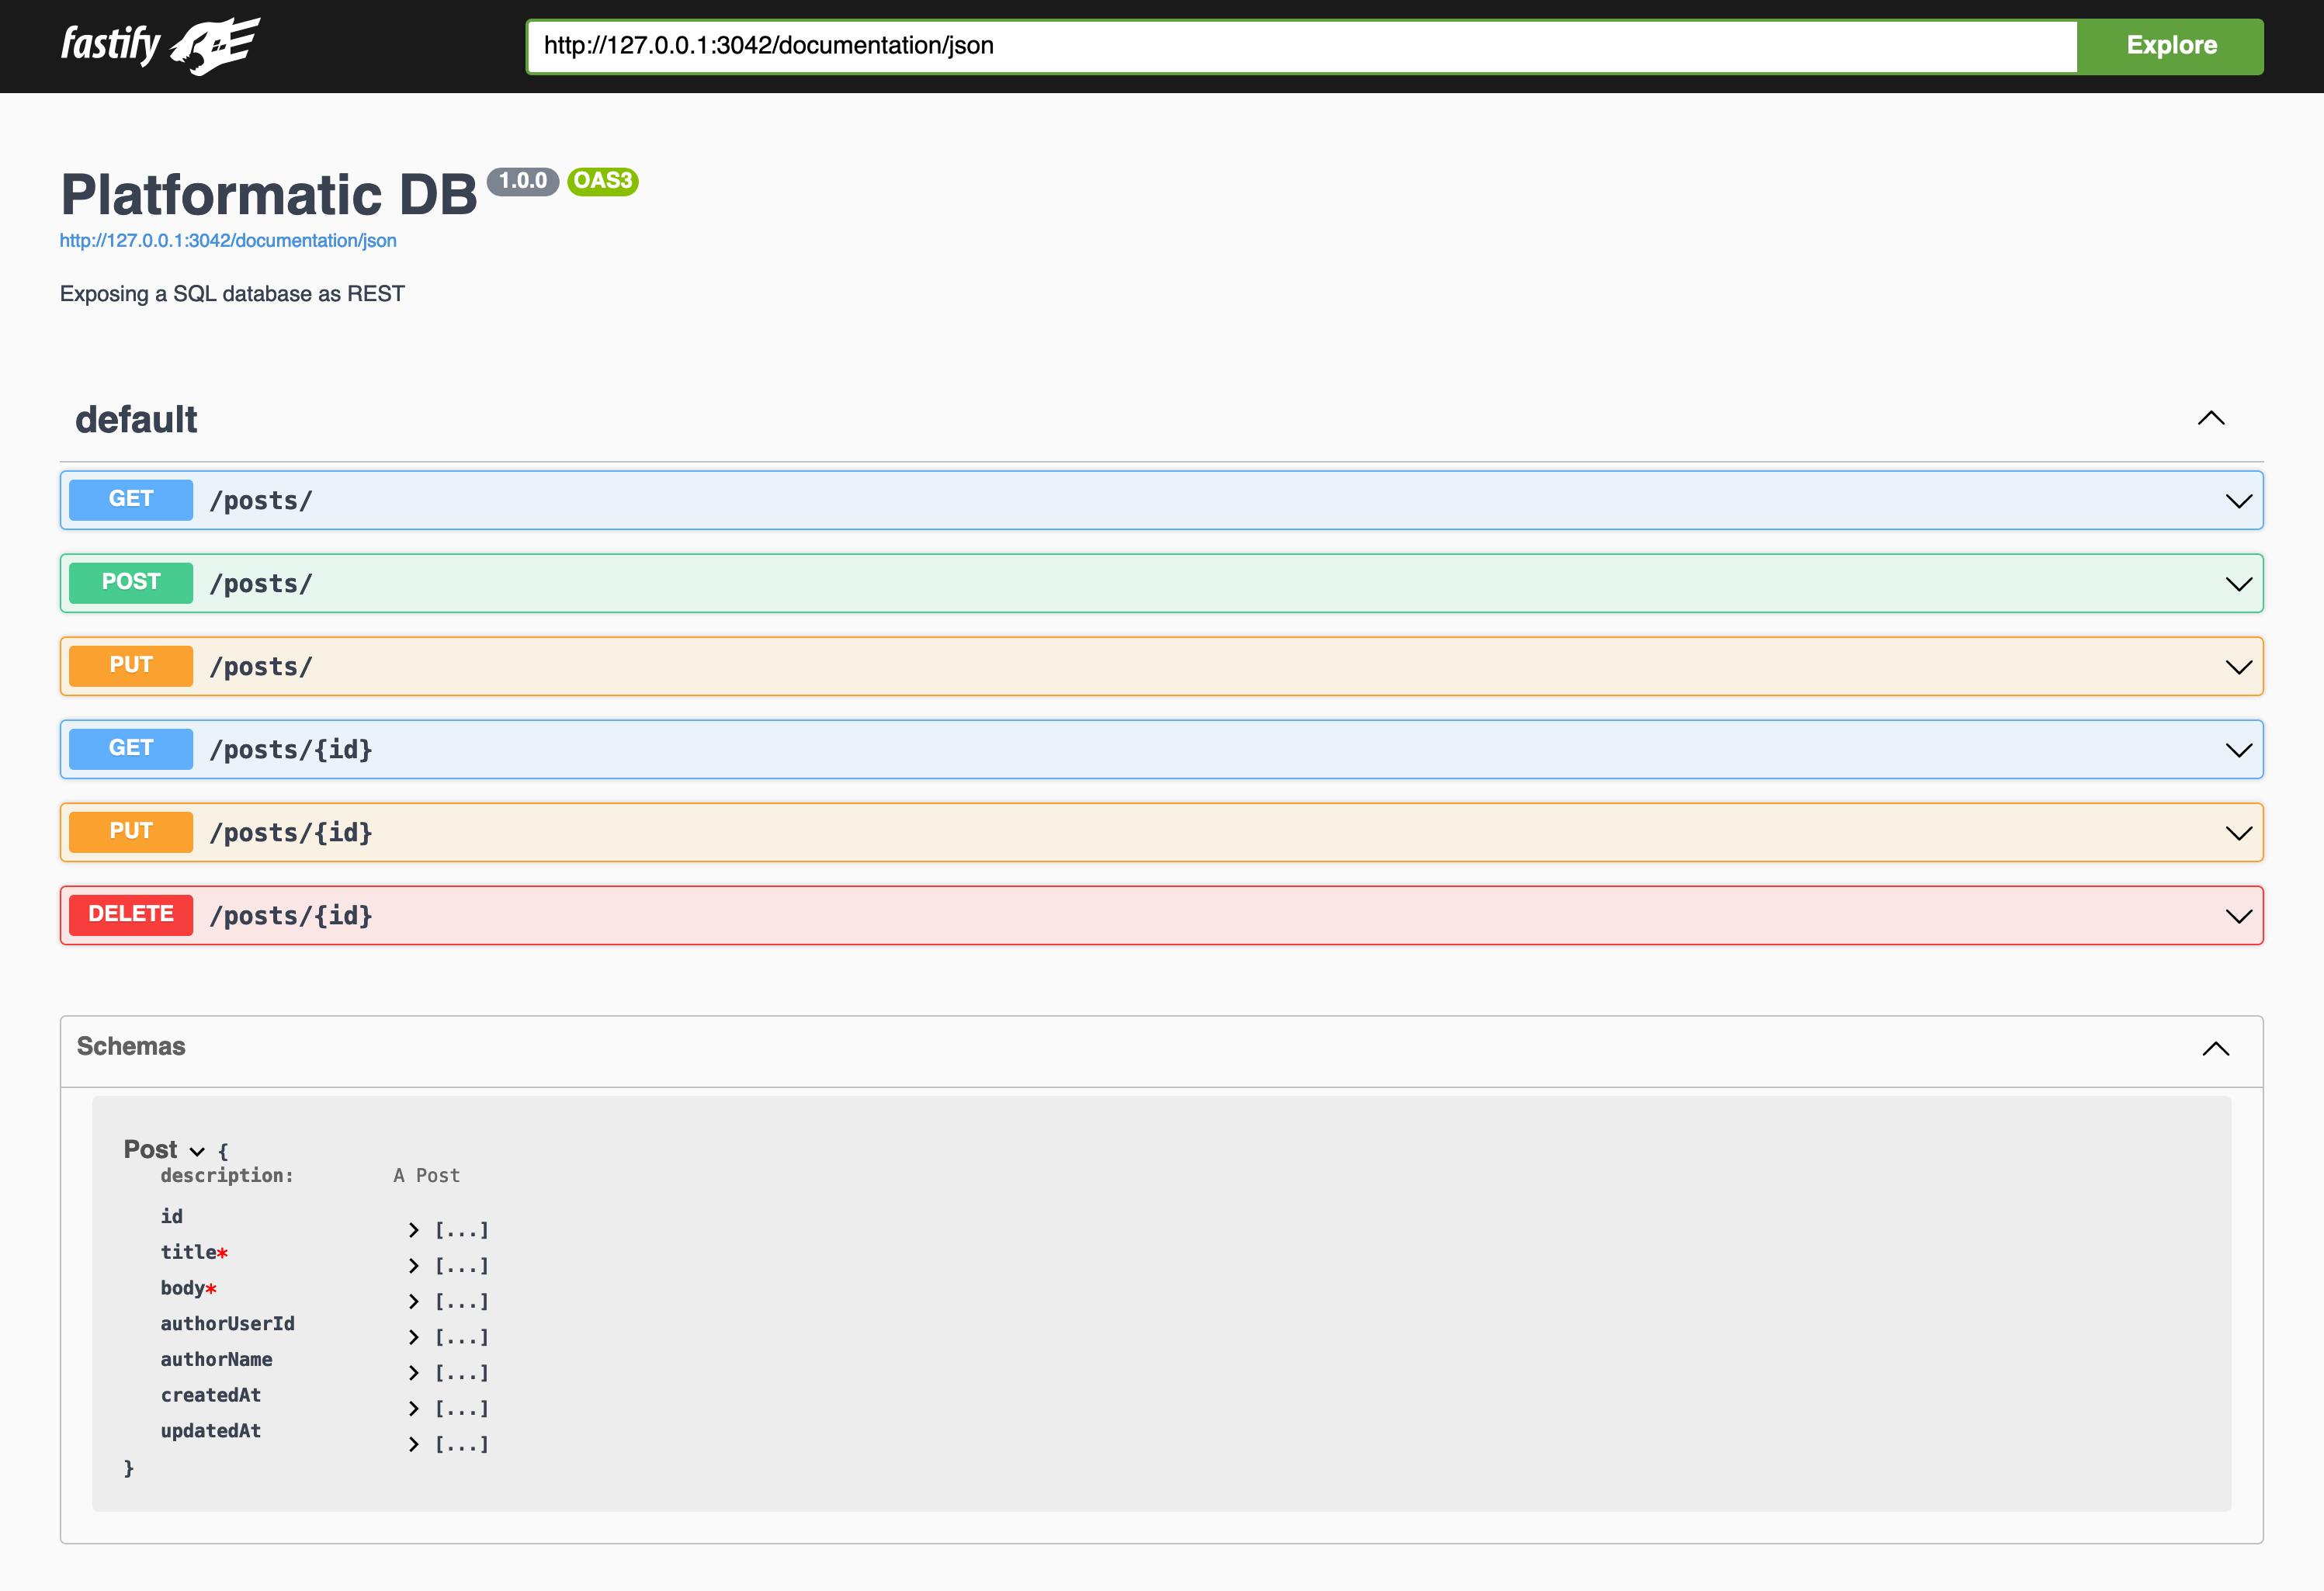 Screenshot of the Swagger UI page for a Platformatic DB app